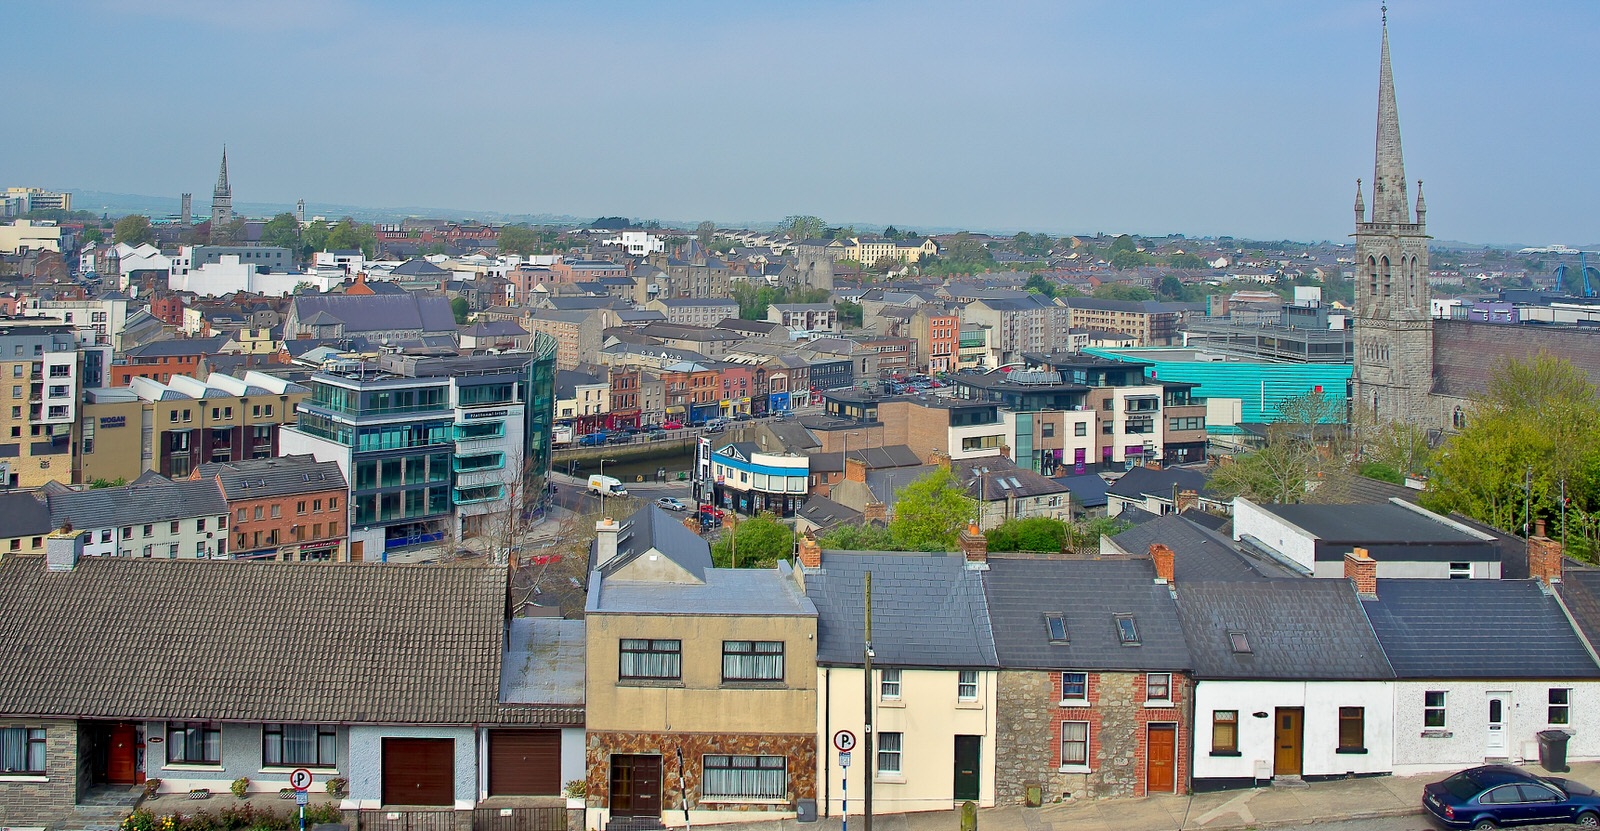 PANORAMIC VIEWS OF DROGHEDA AS IT WAS WAS IN 2011 [PRODUCED USING SONY NEX-5 PANORAMA MODE] 004